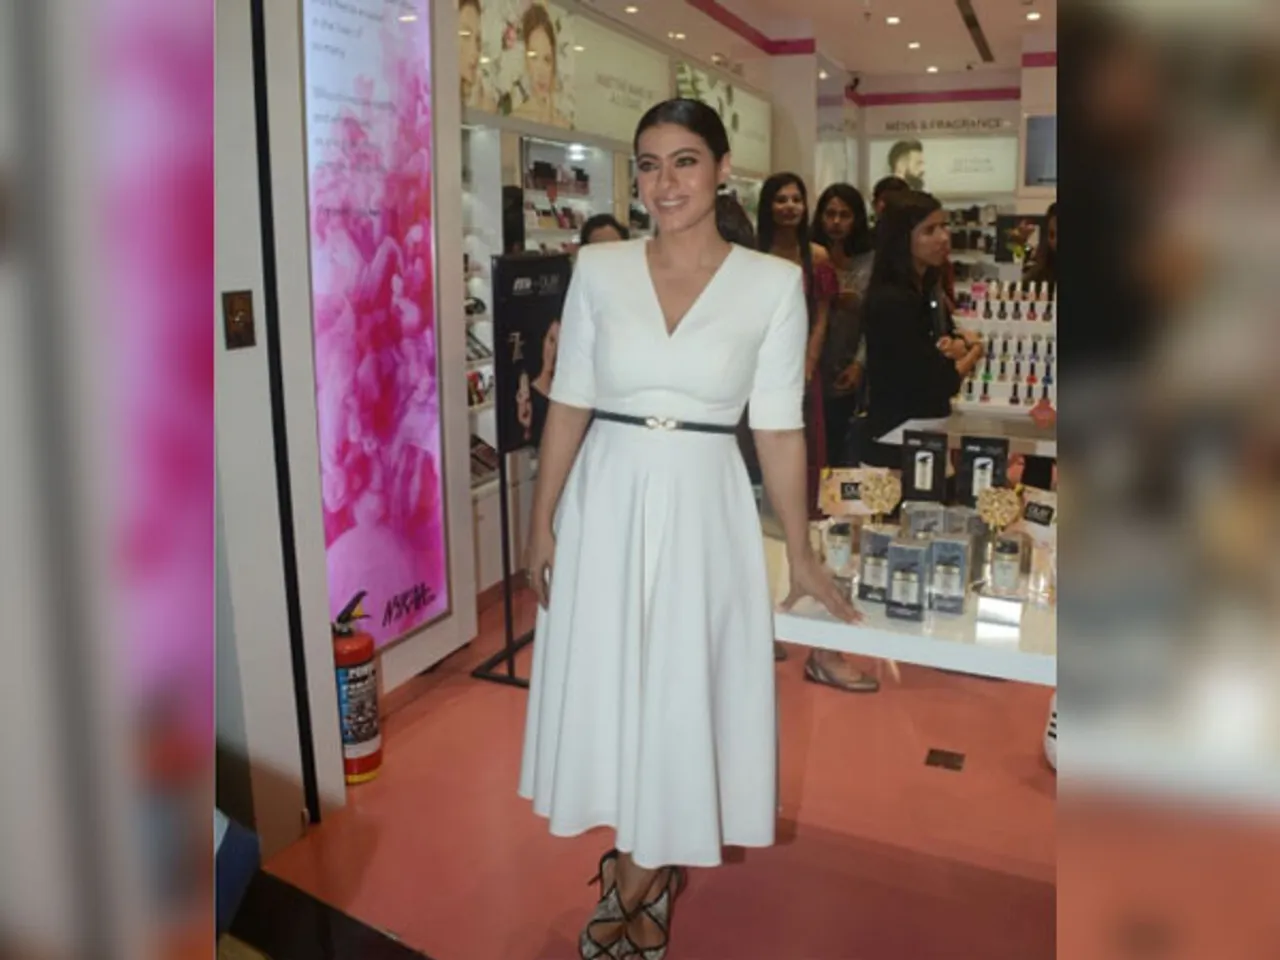 Oops! Kajol's Loses Balance And Trips Down In Public In The Mall